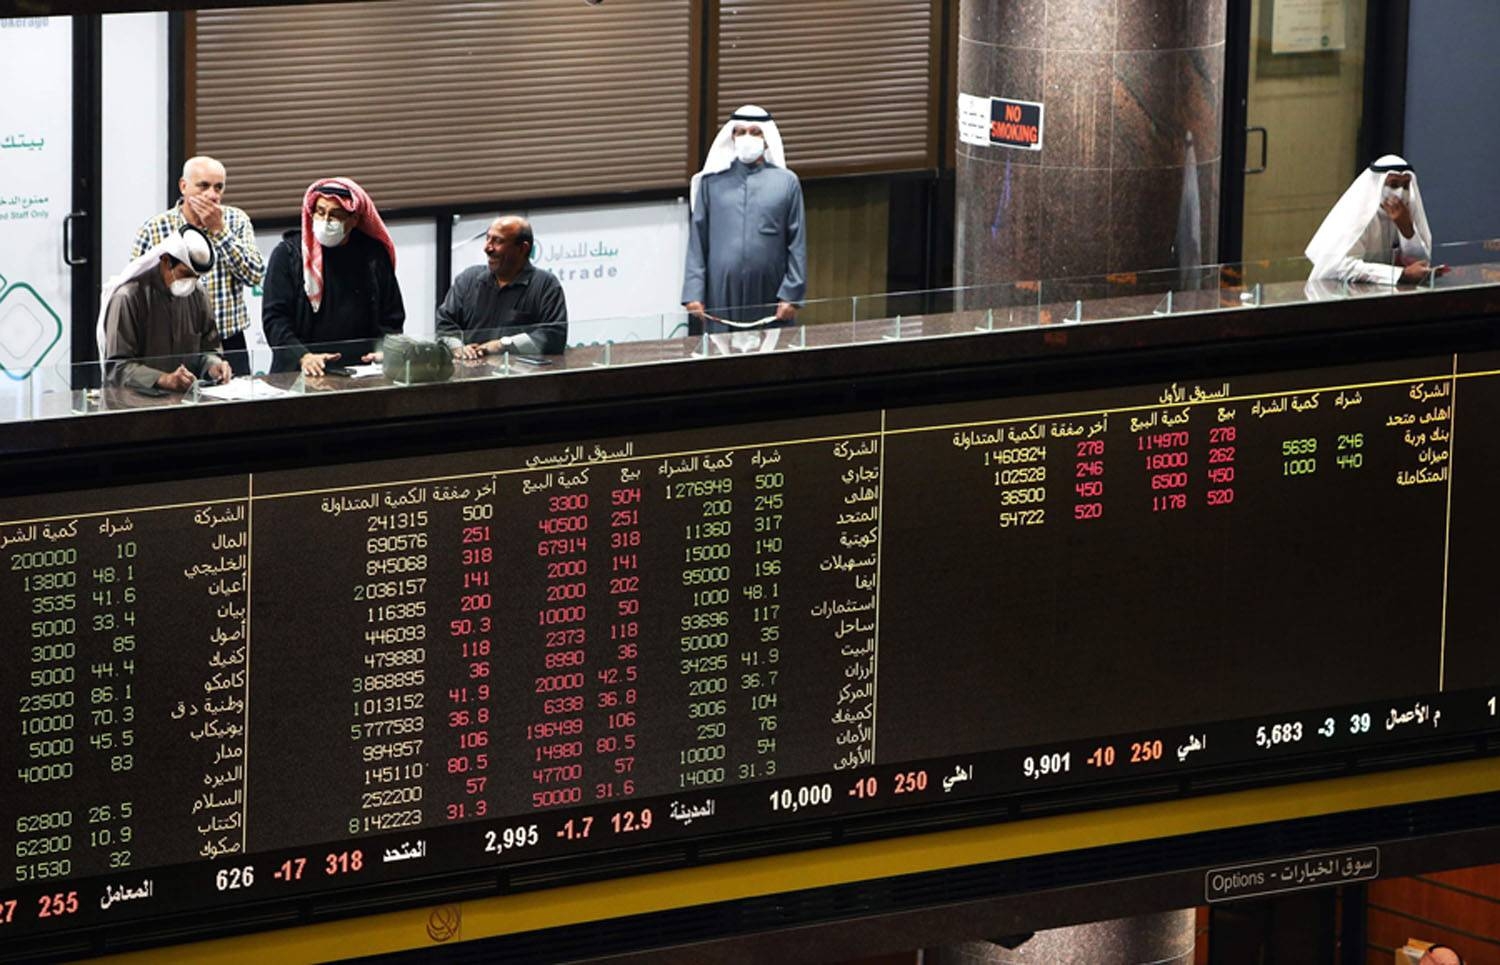 Kuwaiti traders wearing protective masks follow the market at the Boursa Kuwait stock exchange in Kuwait City in this March 1, 2020 file picture. — Courtesy photo